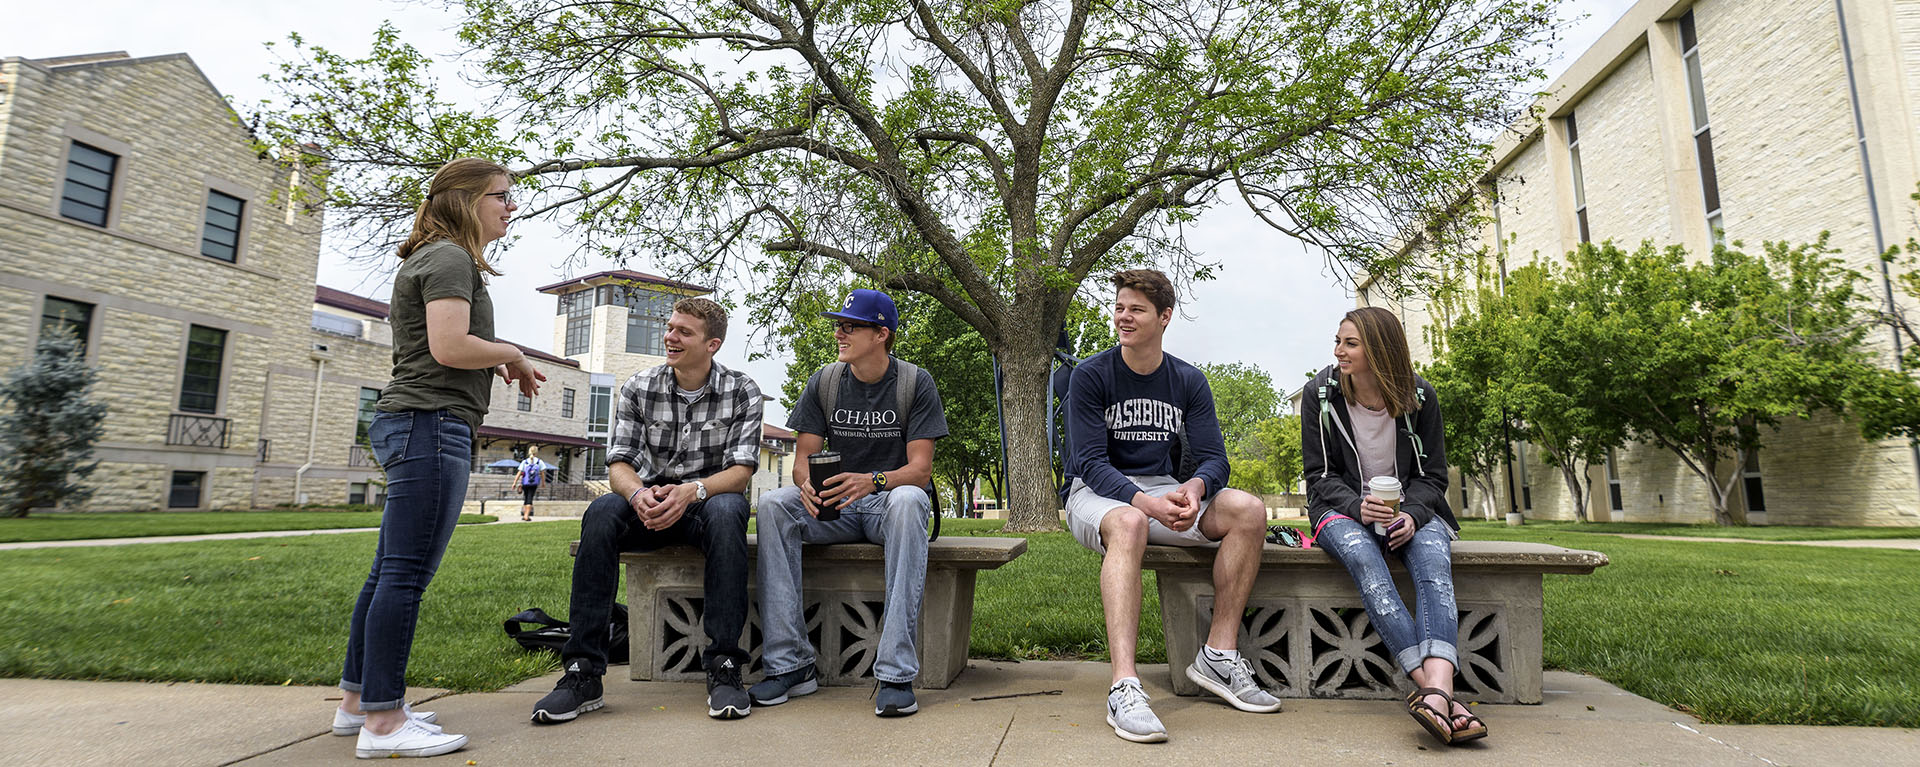 Washburn student ambassadors chat during a break on campus